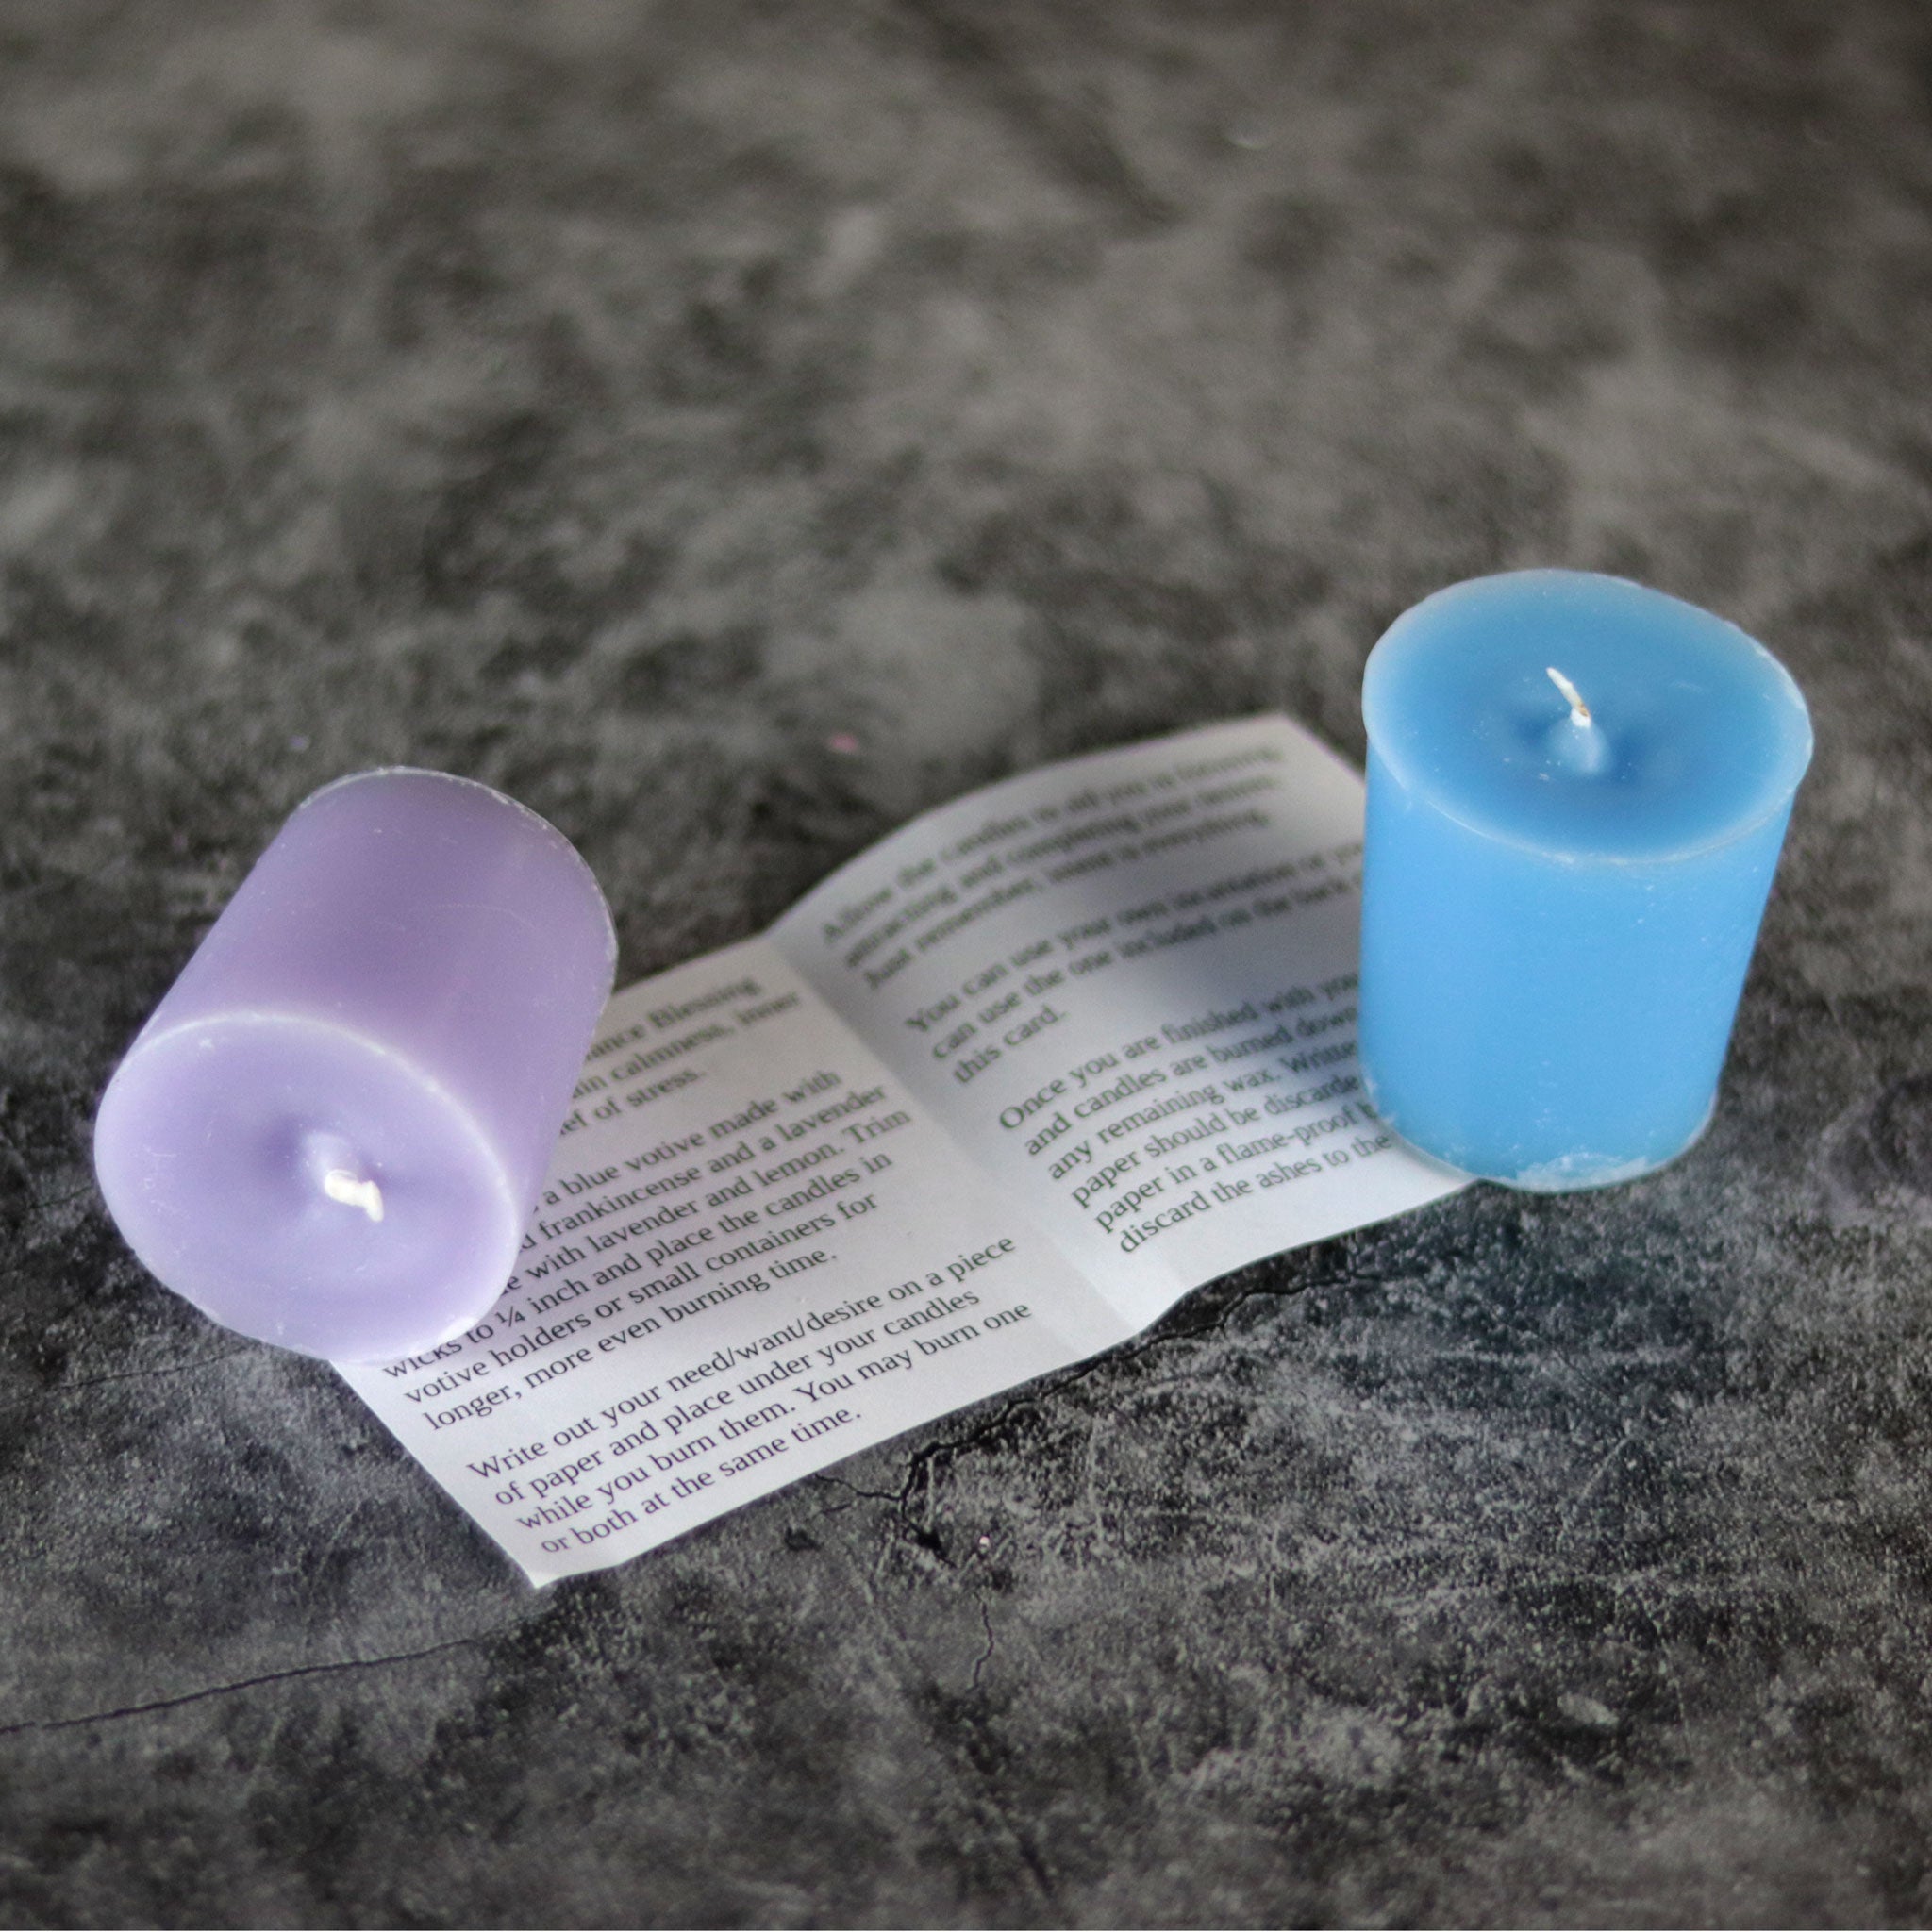 Calming and Inner Balance Blessing Candle Kit - 13 Moons